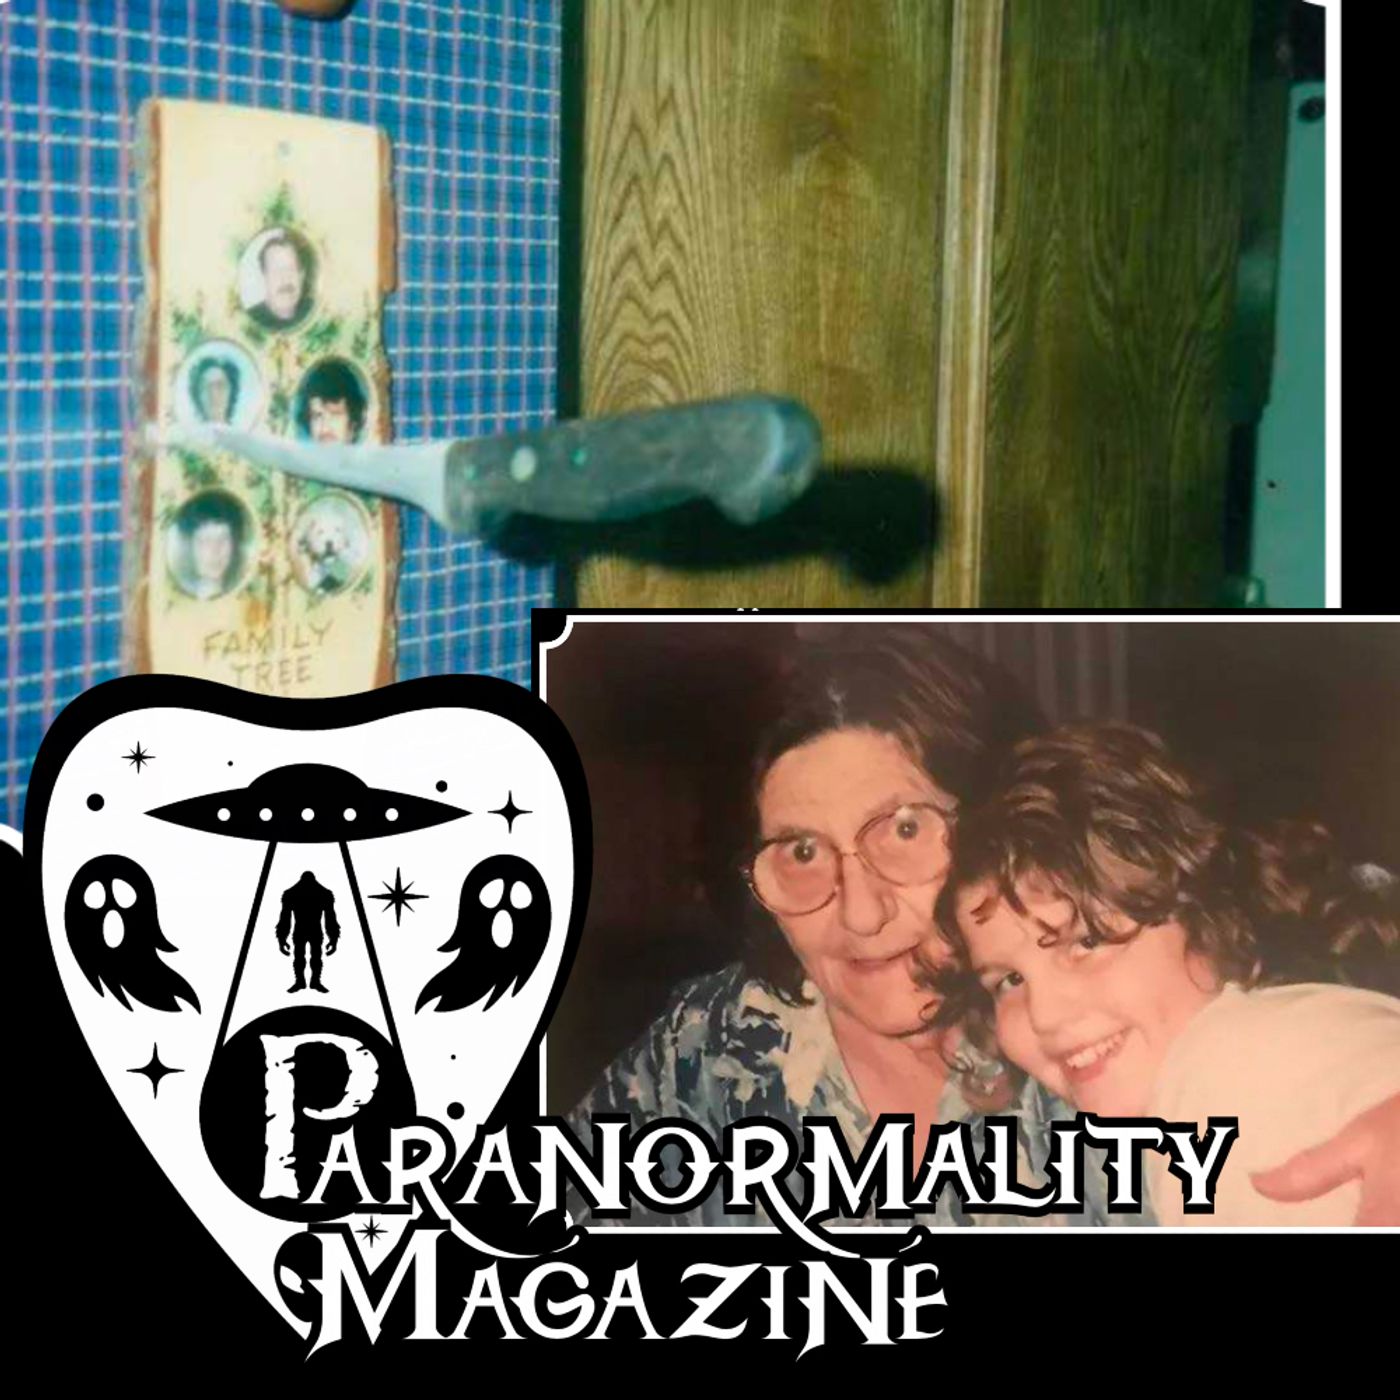 “THE DEMONIC TORTURE OF THE MOFFITT FAMILY” and More Fortean-Related Stories! #ParanormalityMag